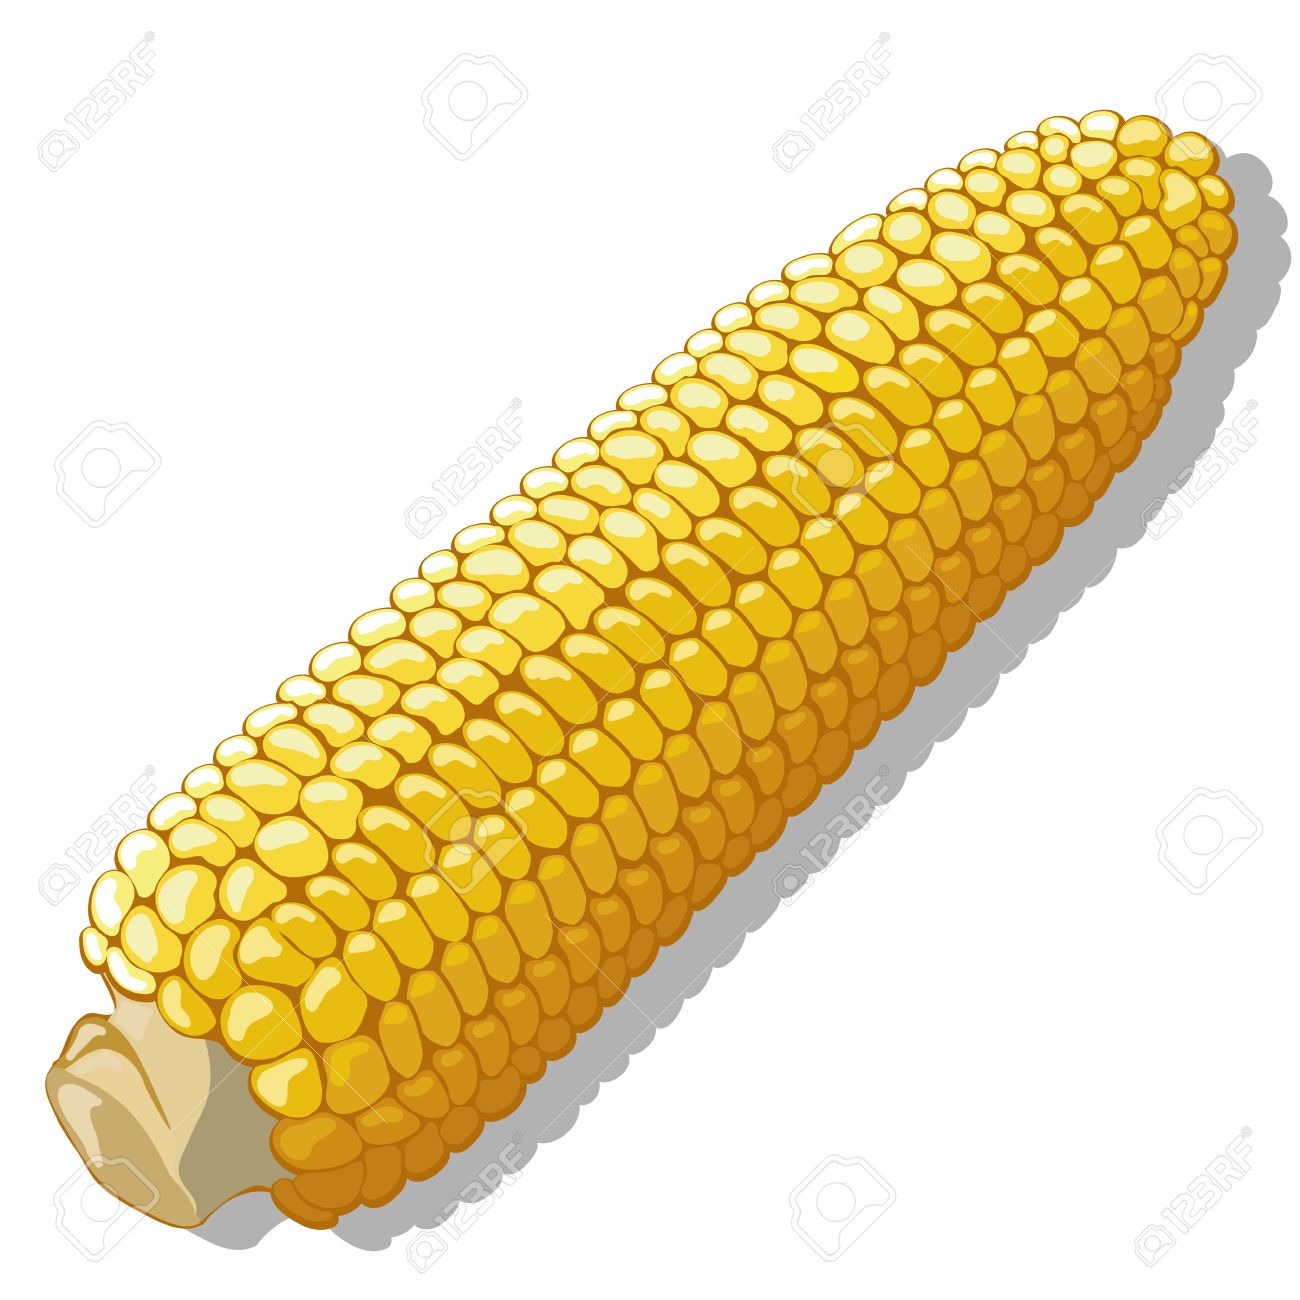 How About Some Corn On The Co